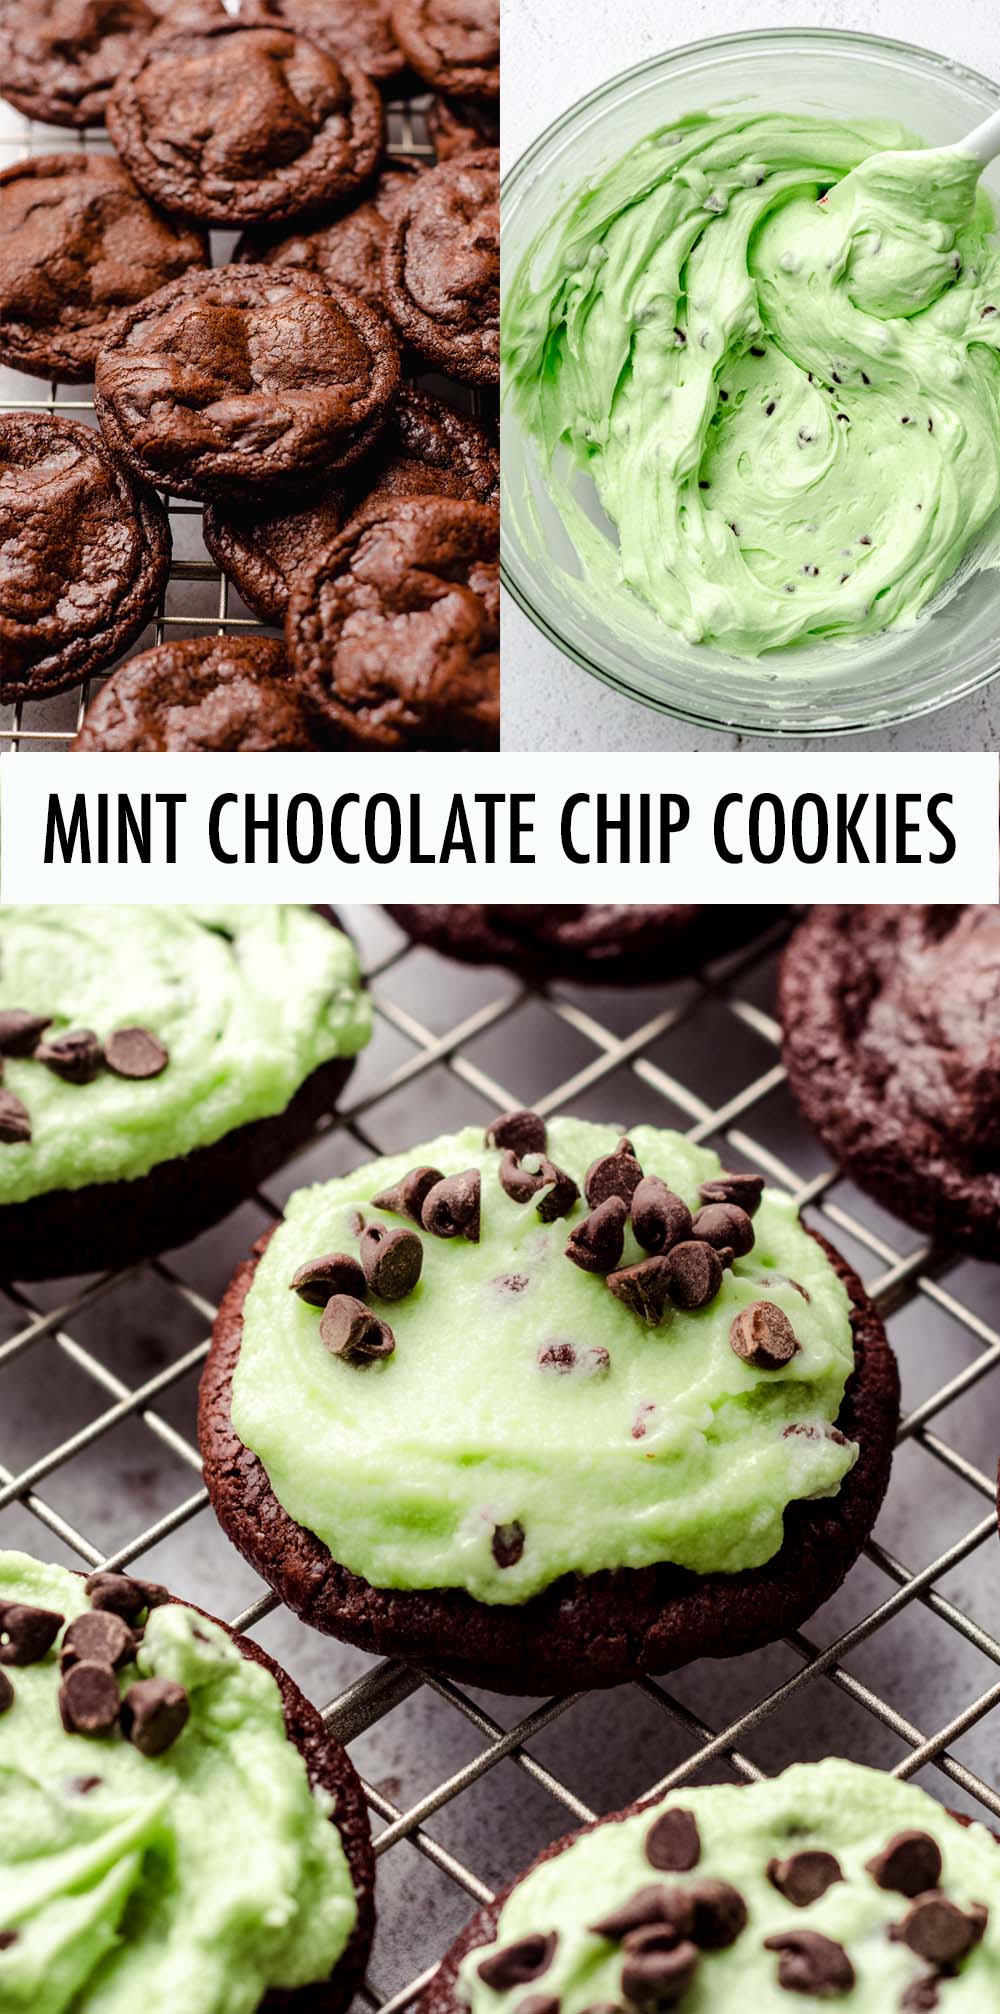 Rich and decadent chocolate chocolate chip cookies topped with a smooth and creamy mint chocolate chip buttercream. via @frshaprilflours